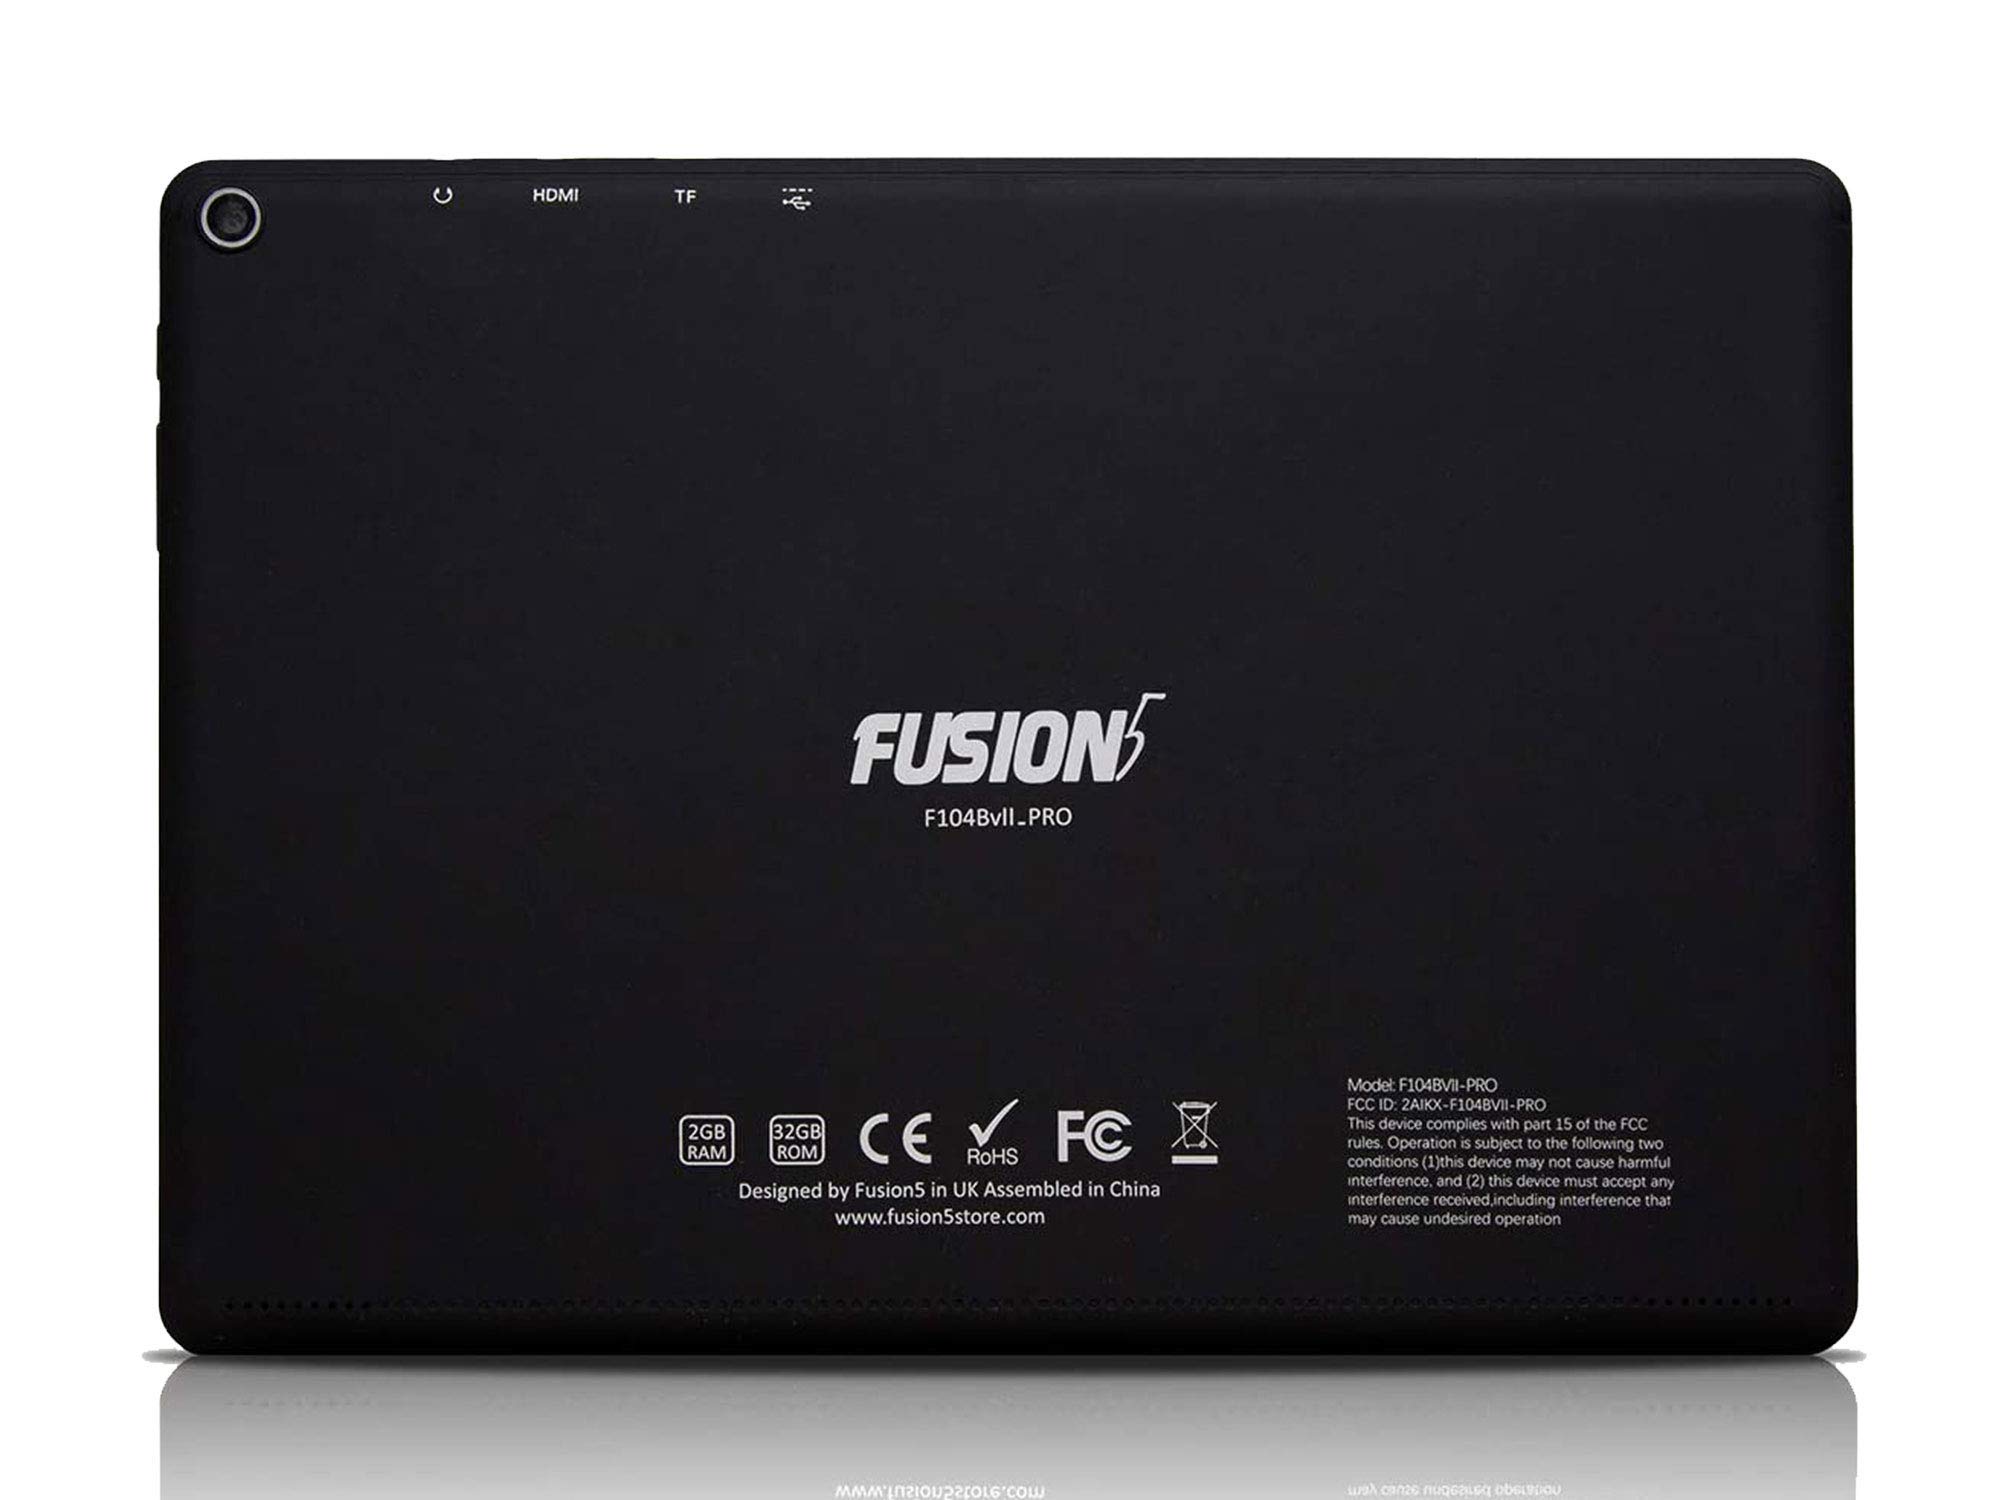 Fusion5 104Bv2 PRO Android Tablet PC - (Android 9.0 Pie, 2GB RAM, 32GB Storage, Bluetooth, Dual-Band Wi-Fi, HDMI, HD IPS Screen, GPS, FM, 5MP and 2MP Cameras)